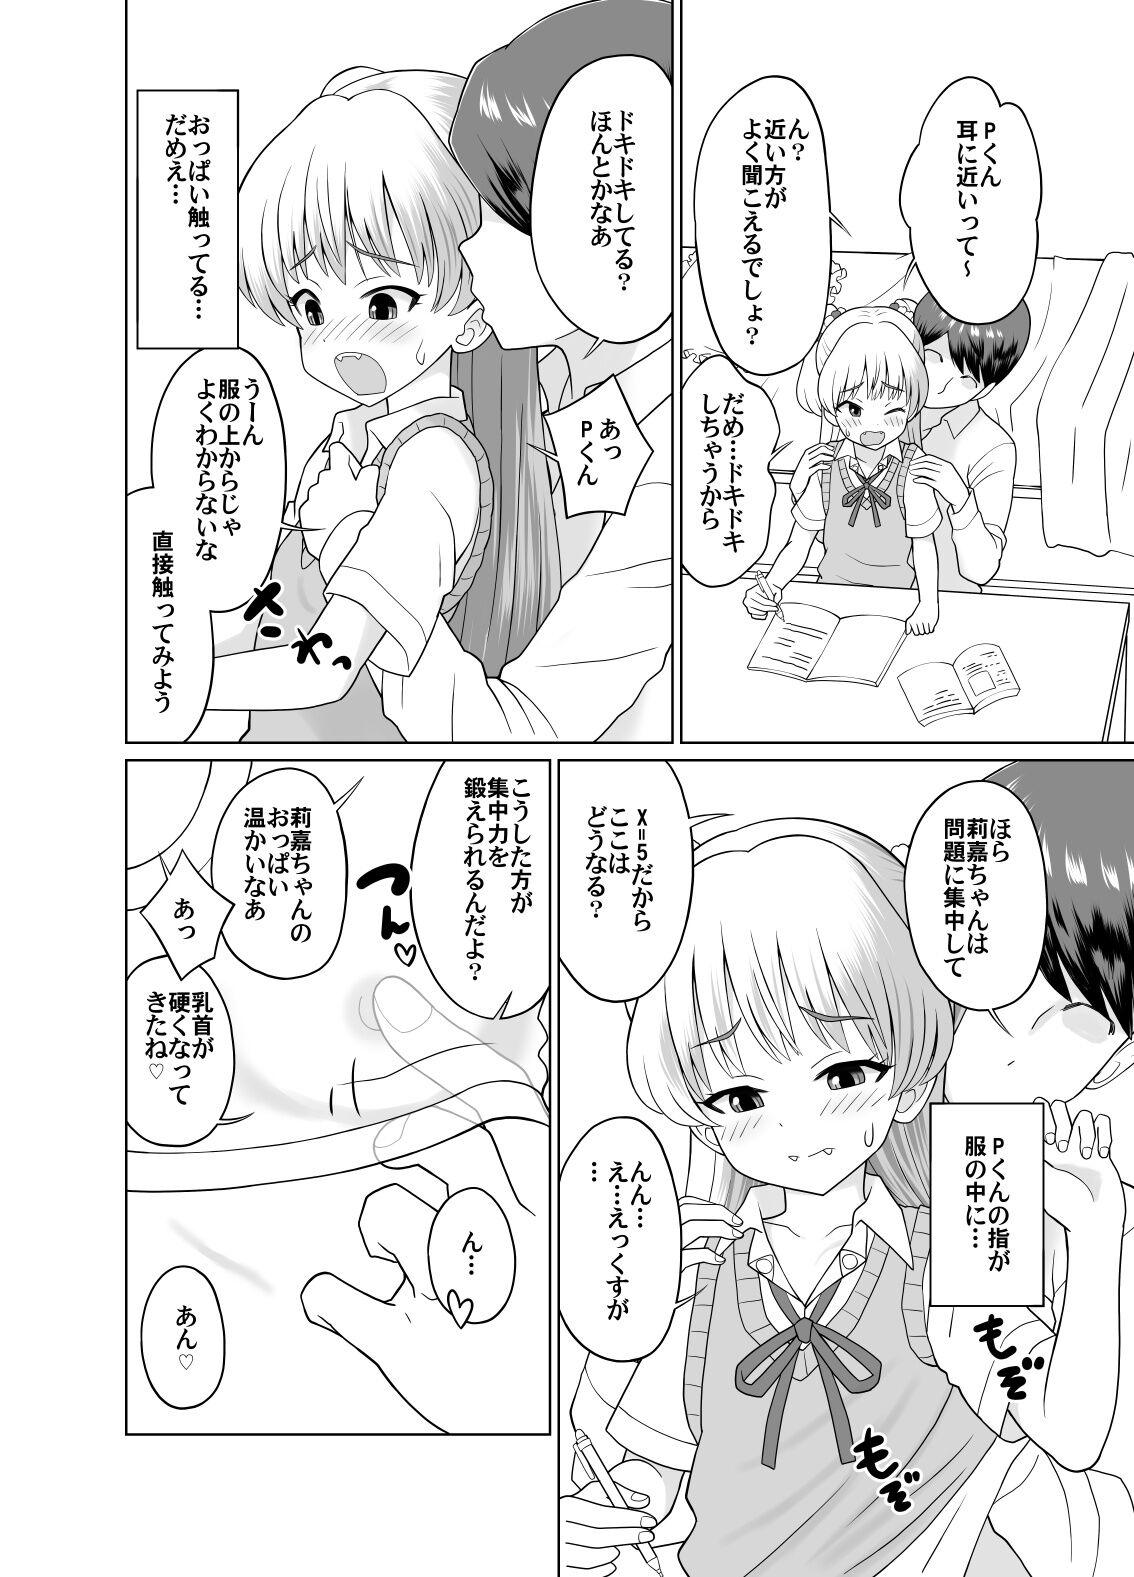 Lover Rika-chan to Obenkyou♡ - The idolmaster Eng Sub - Page 2